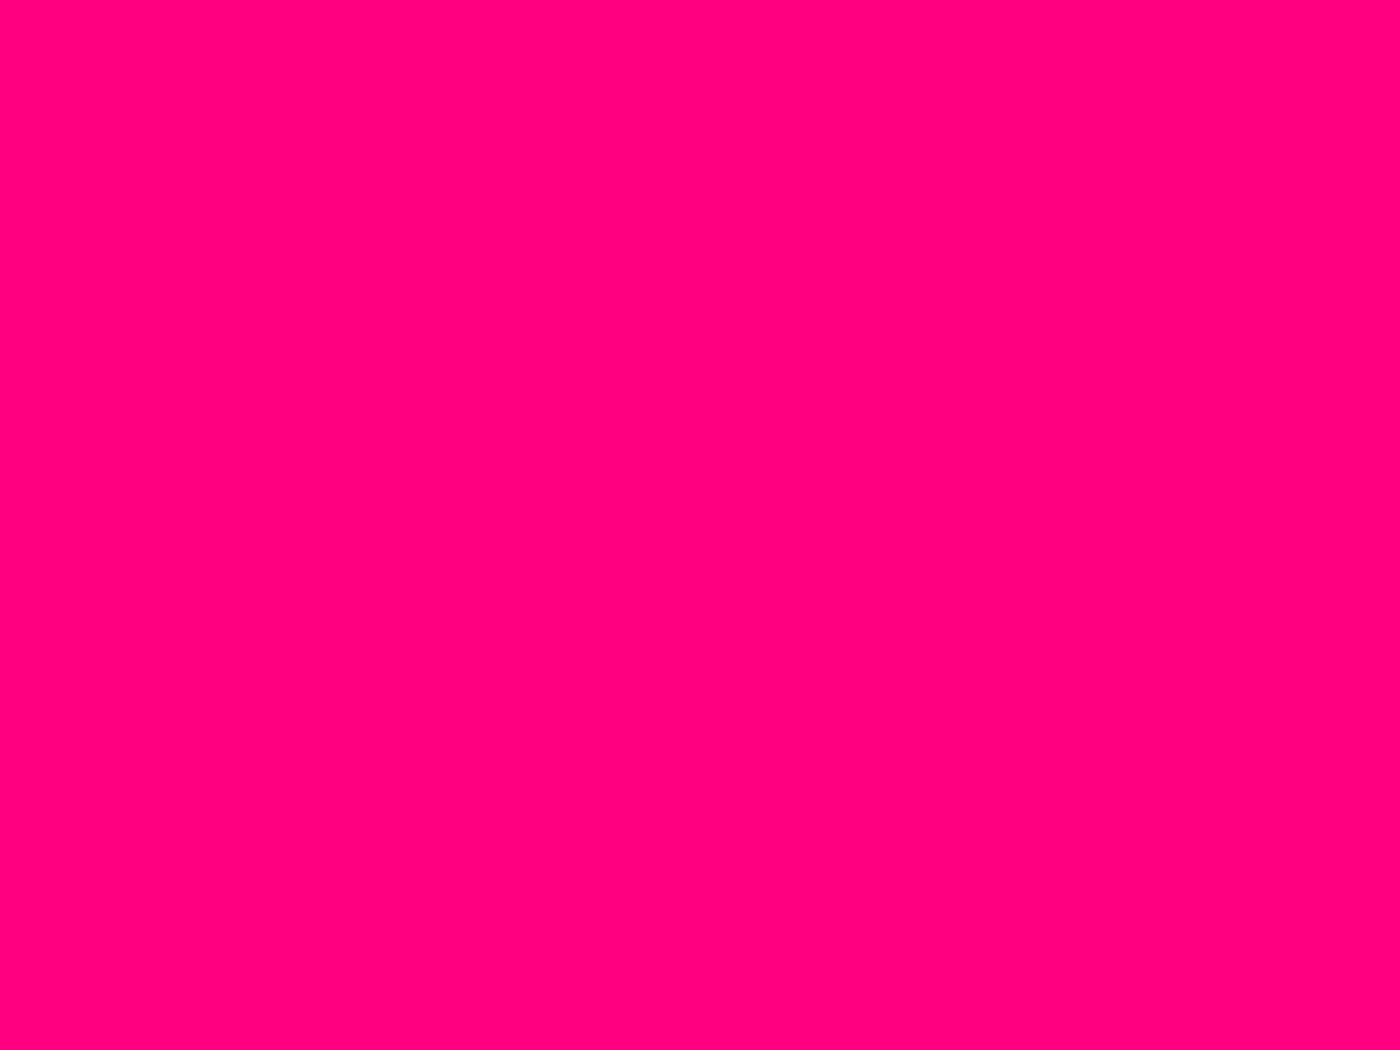 Solid Bright Pink Background Image Pictures Becuo